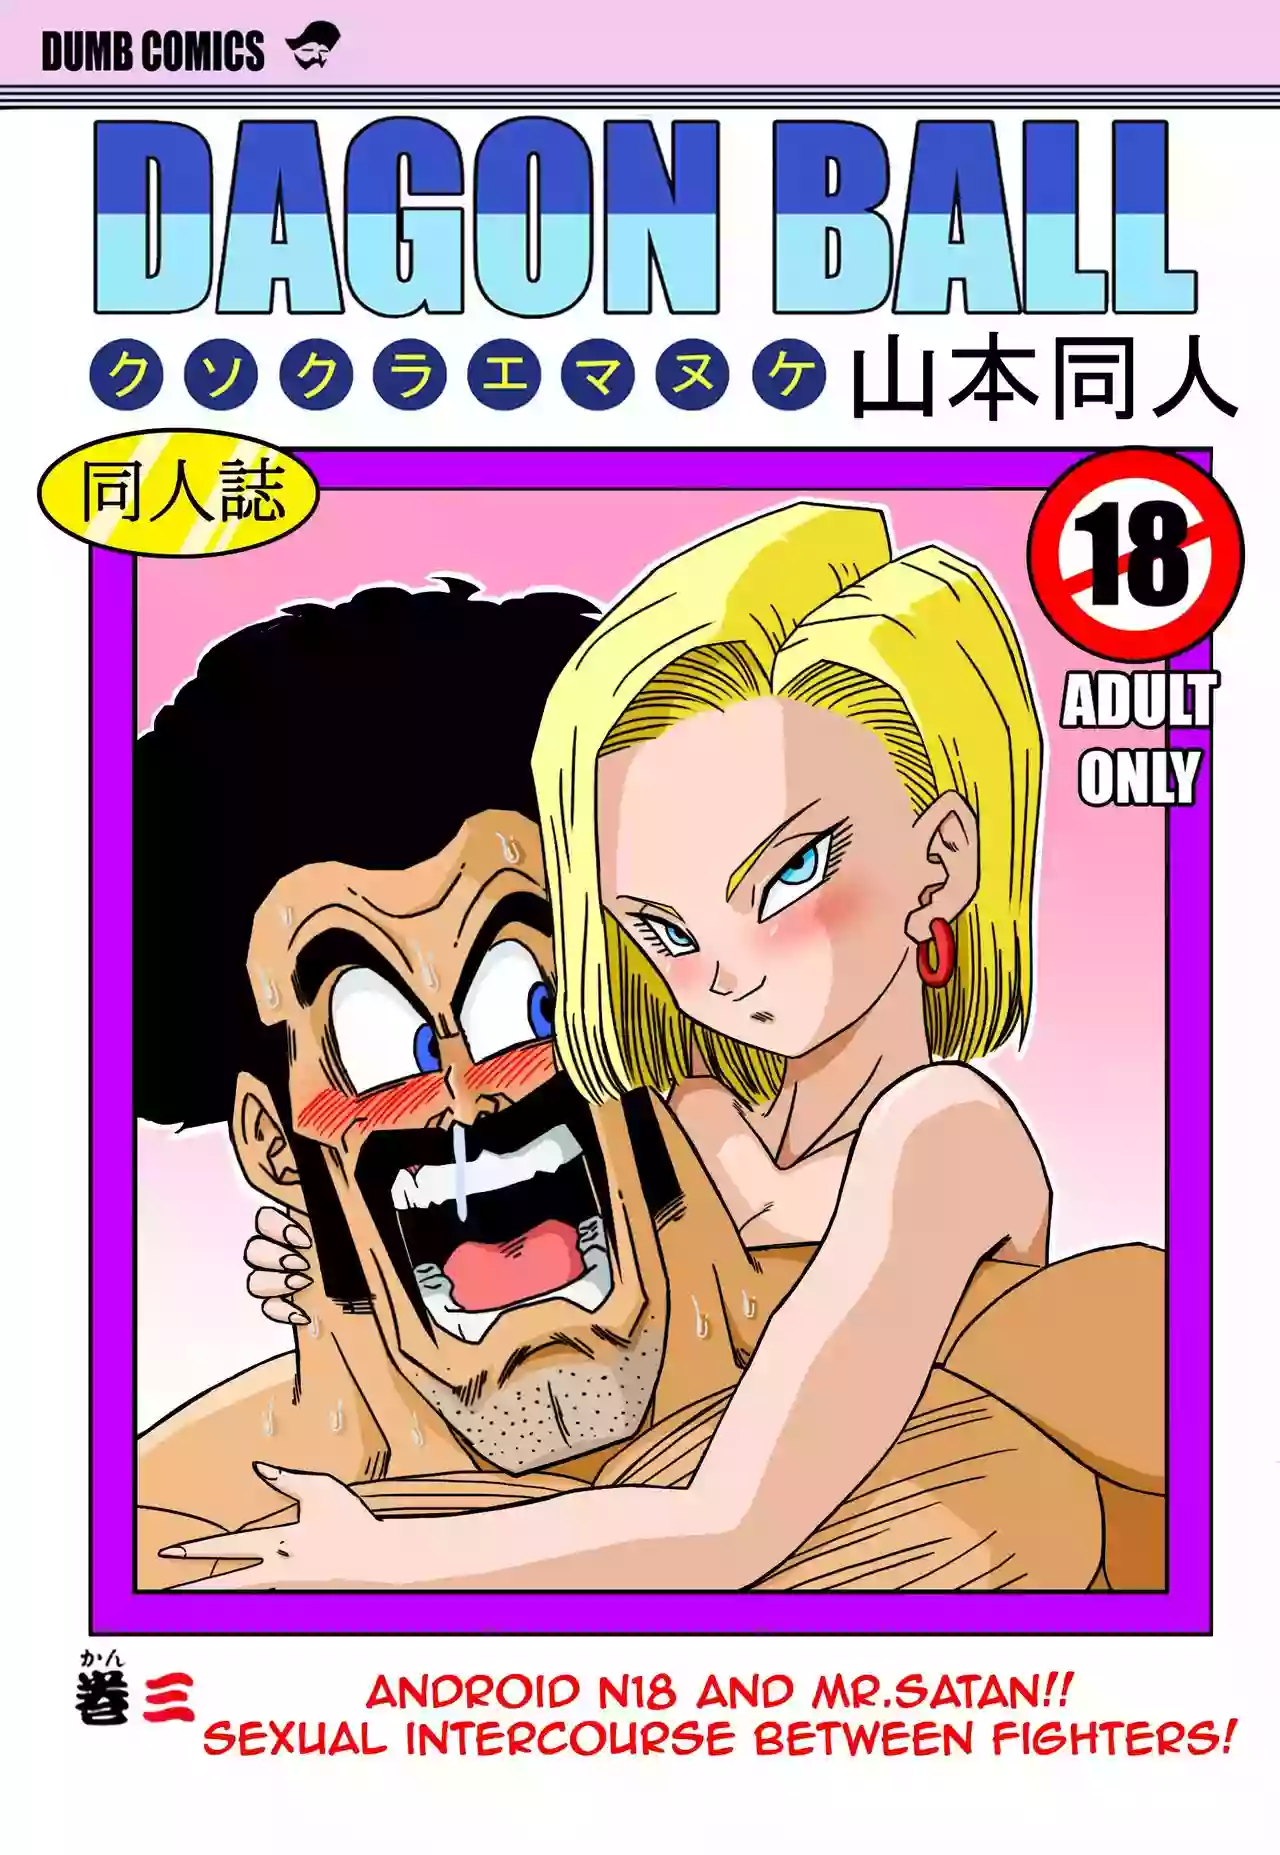 [Yamamoto] Android N18 and Mr. Satan Sexual Intercourse between Fighters! (German)